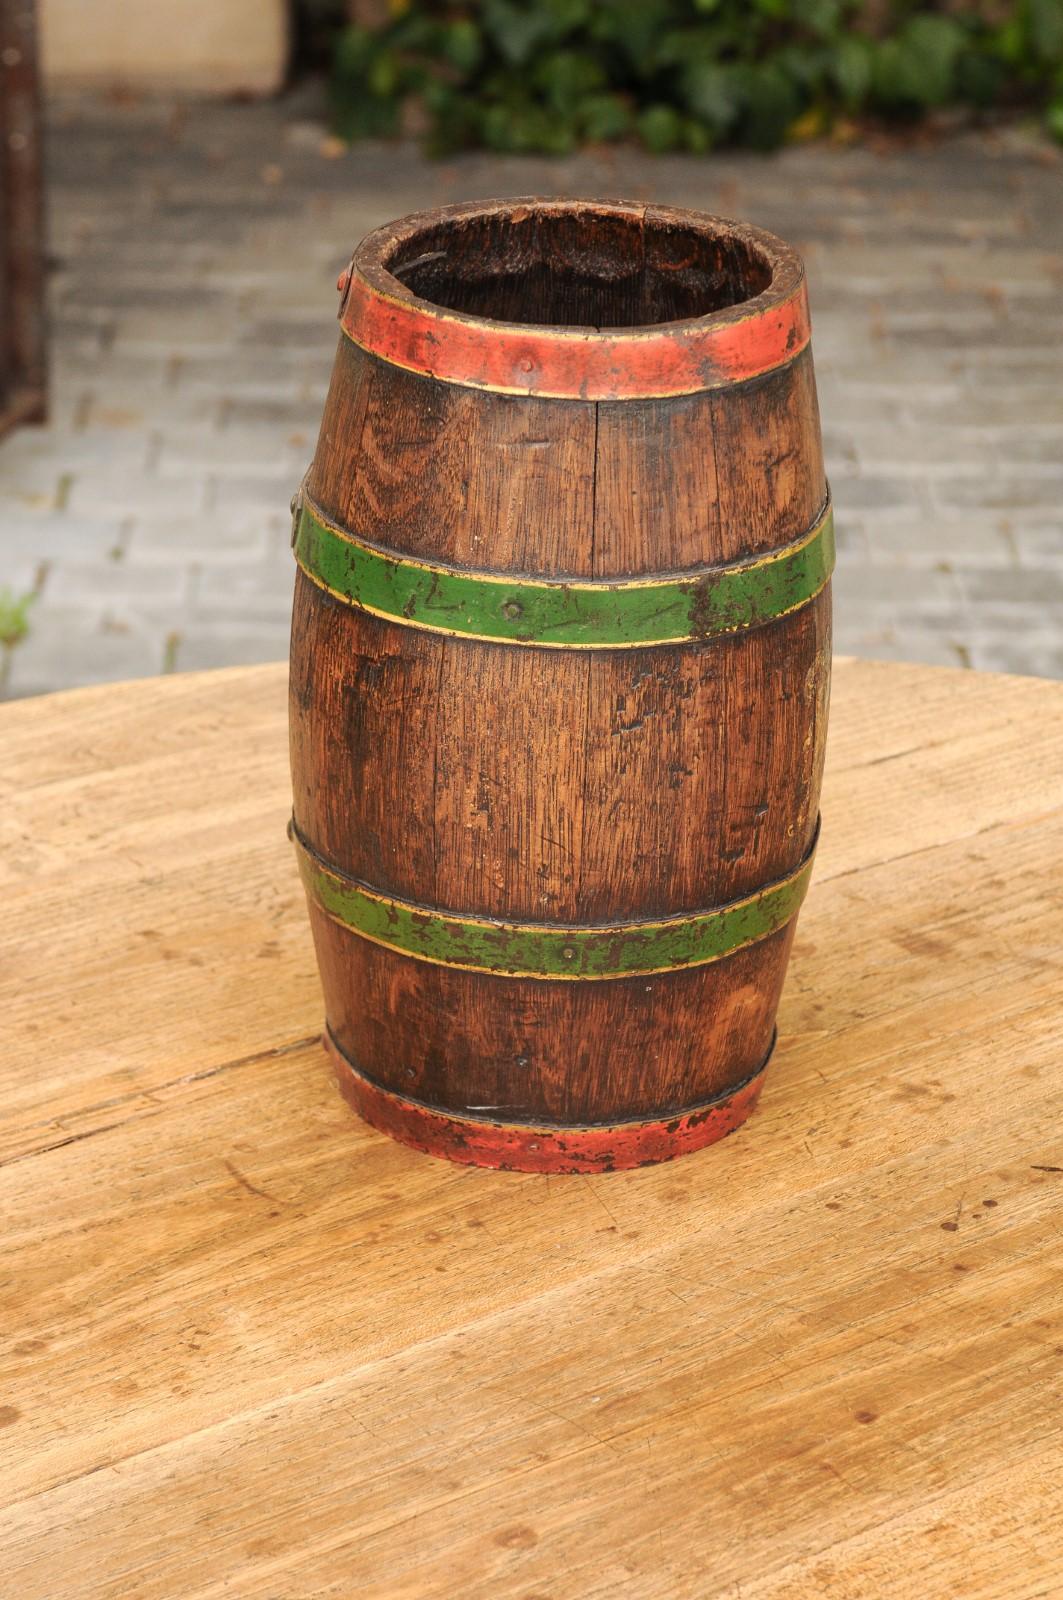 Petite 1900s Rustic English Edwardian Wooden Barrel with Green and Red Accents 1